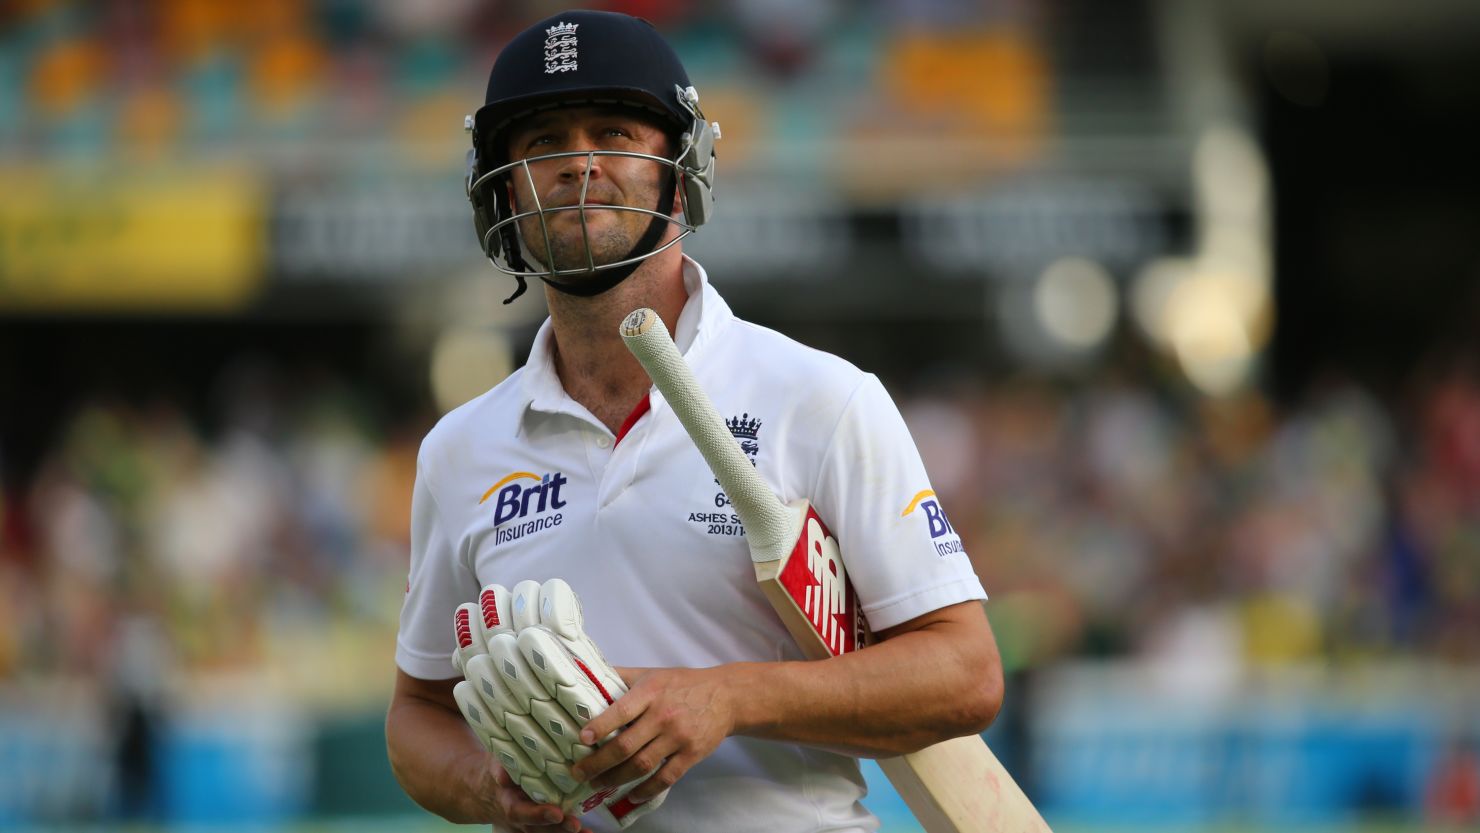 Trott scored 19 runs in two innings during England's first test defeat by Australia.